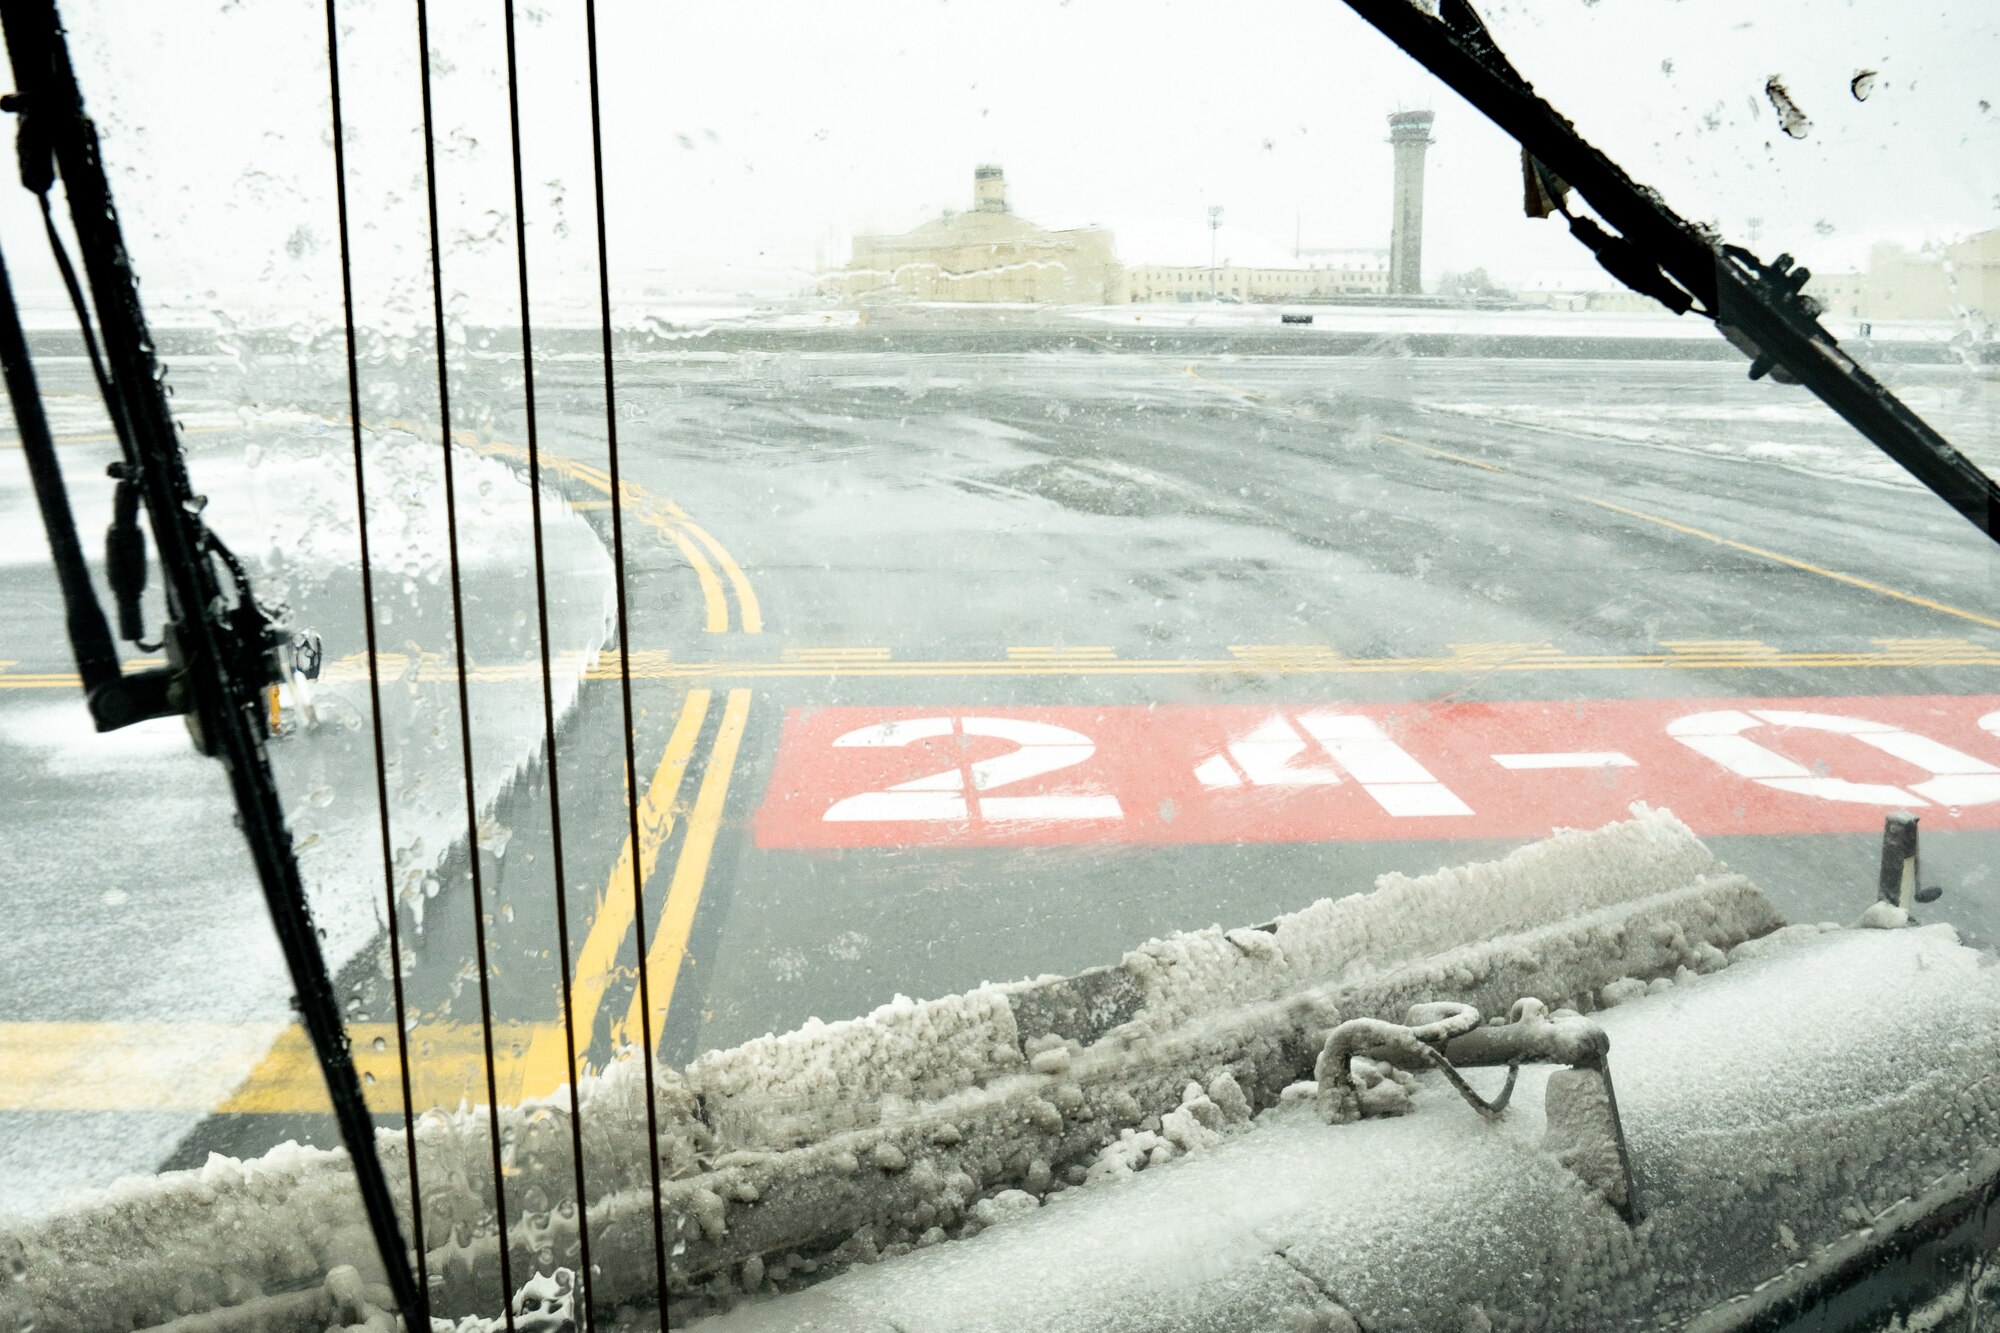 A 773d Civil Engineering Squadron snow sweeper clears the flight line in front of the Air Traffic Control tower after an early-season snowfall.